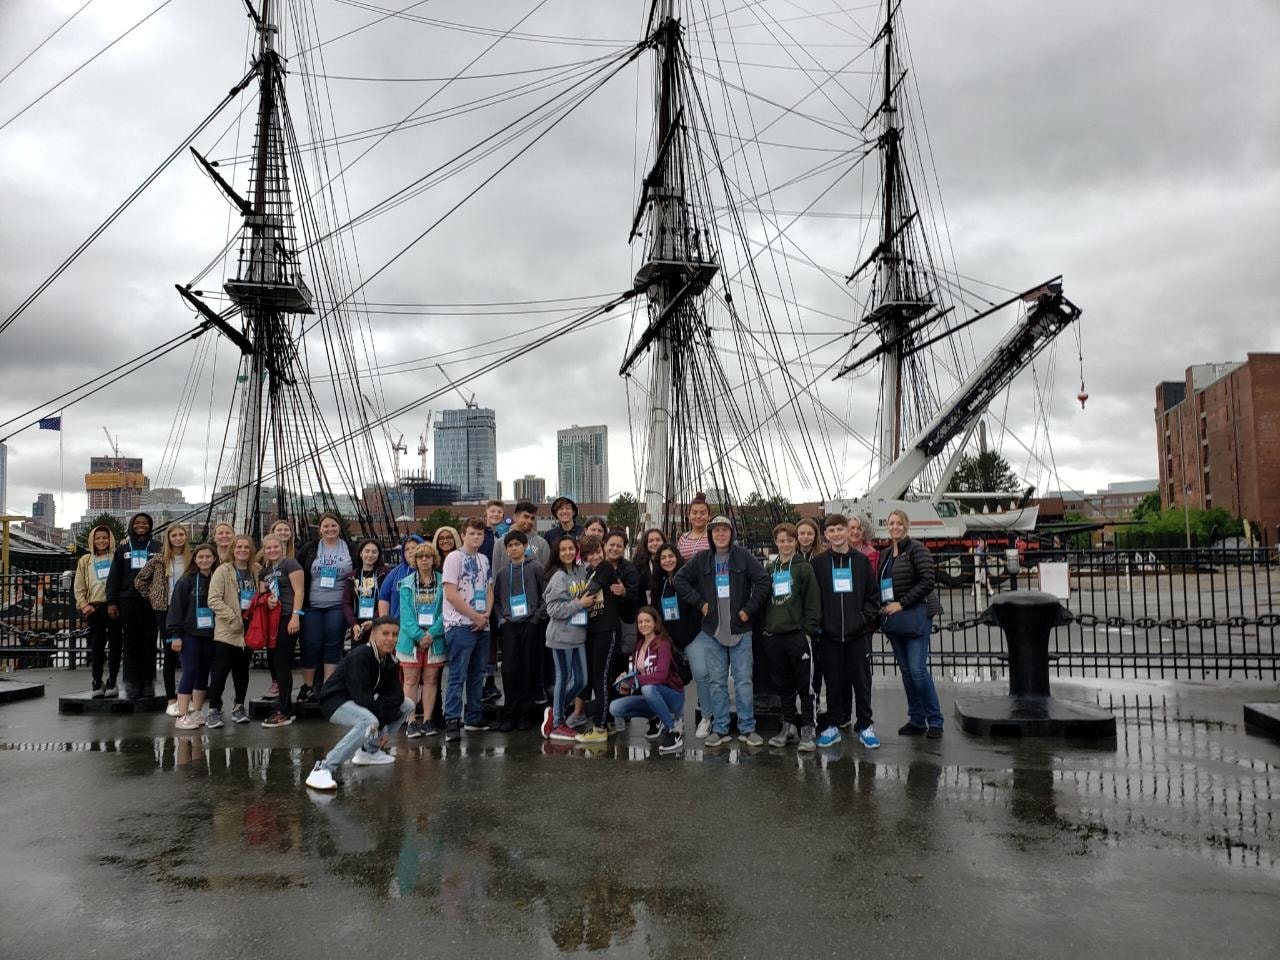 Group of students in front of a ship